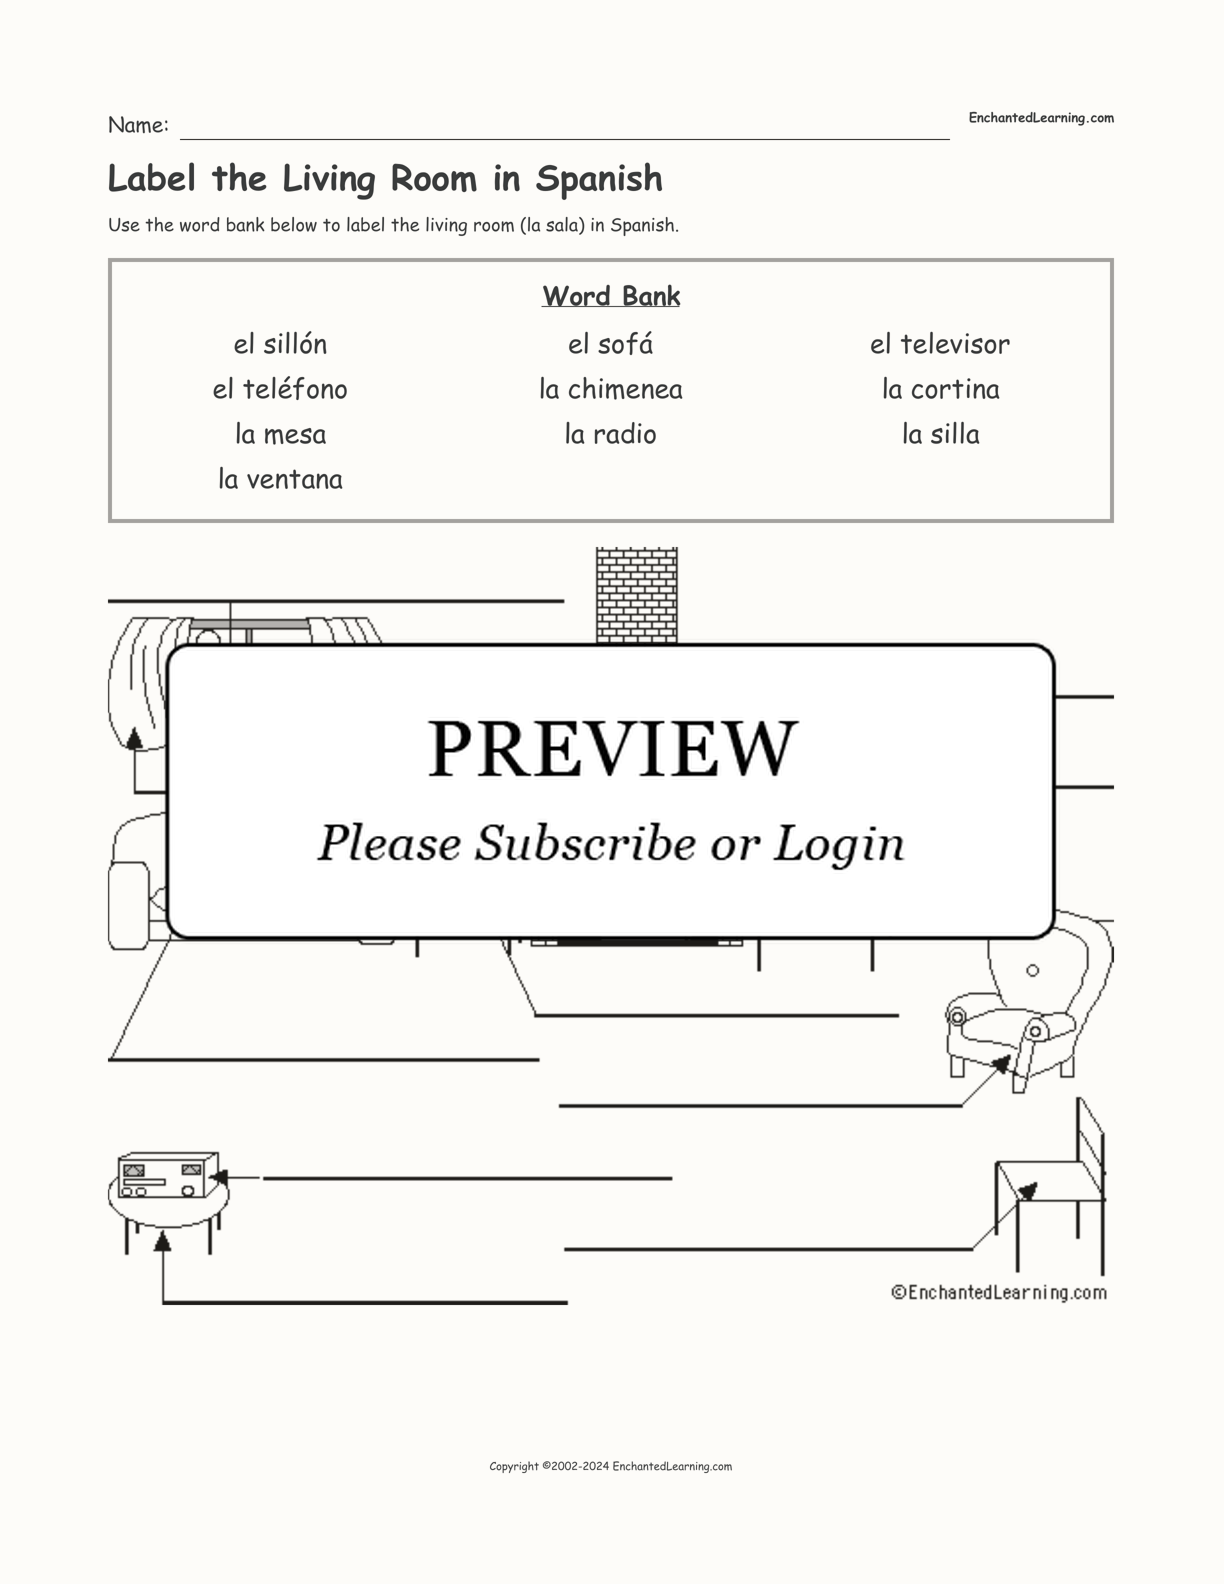 Label the Living Room in Spanish interactive worksheet page 1